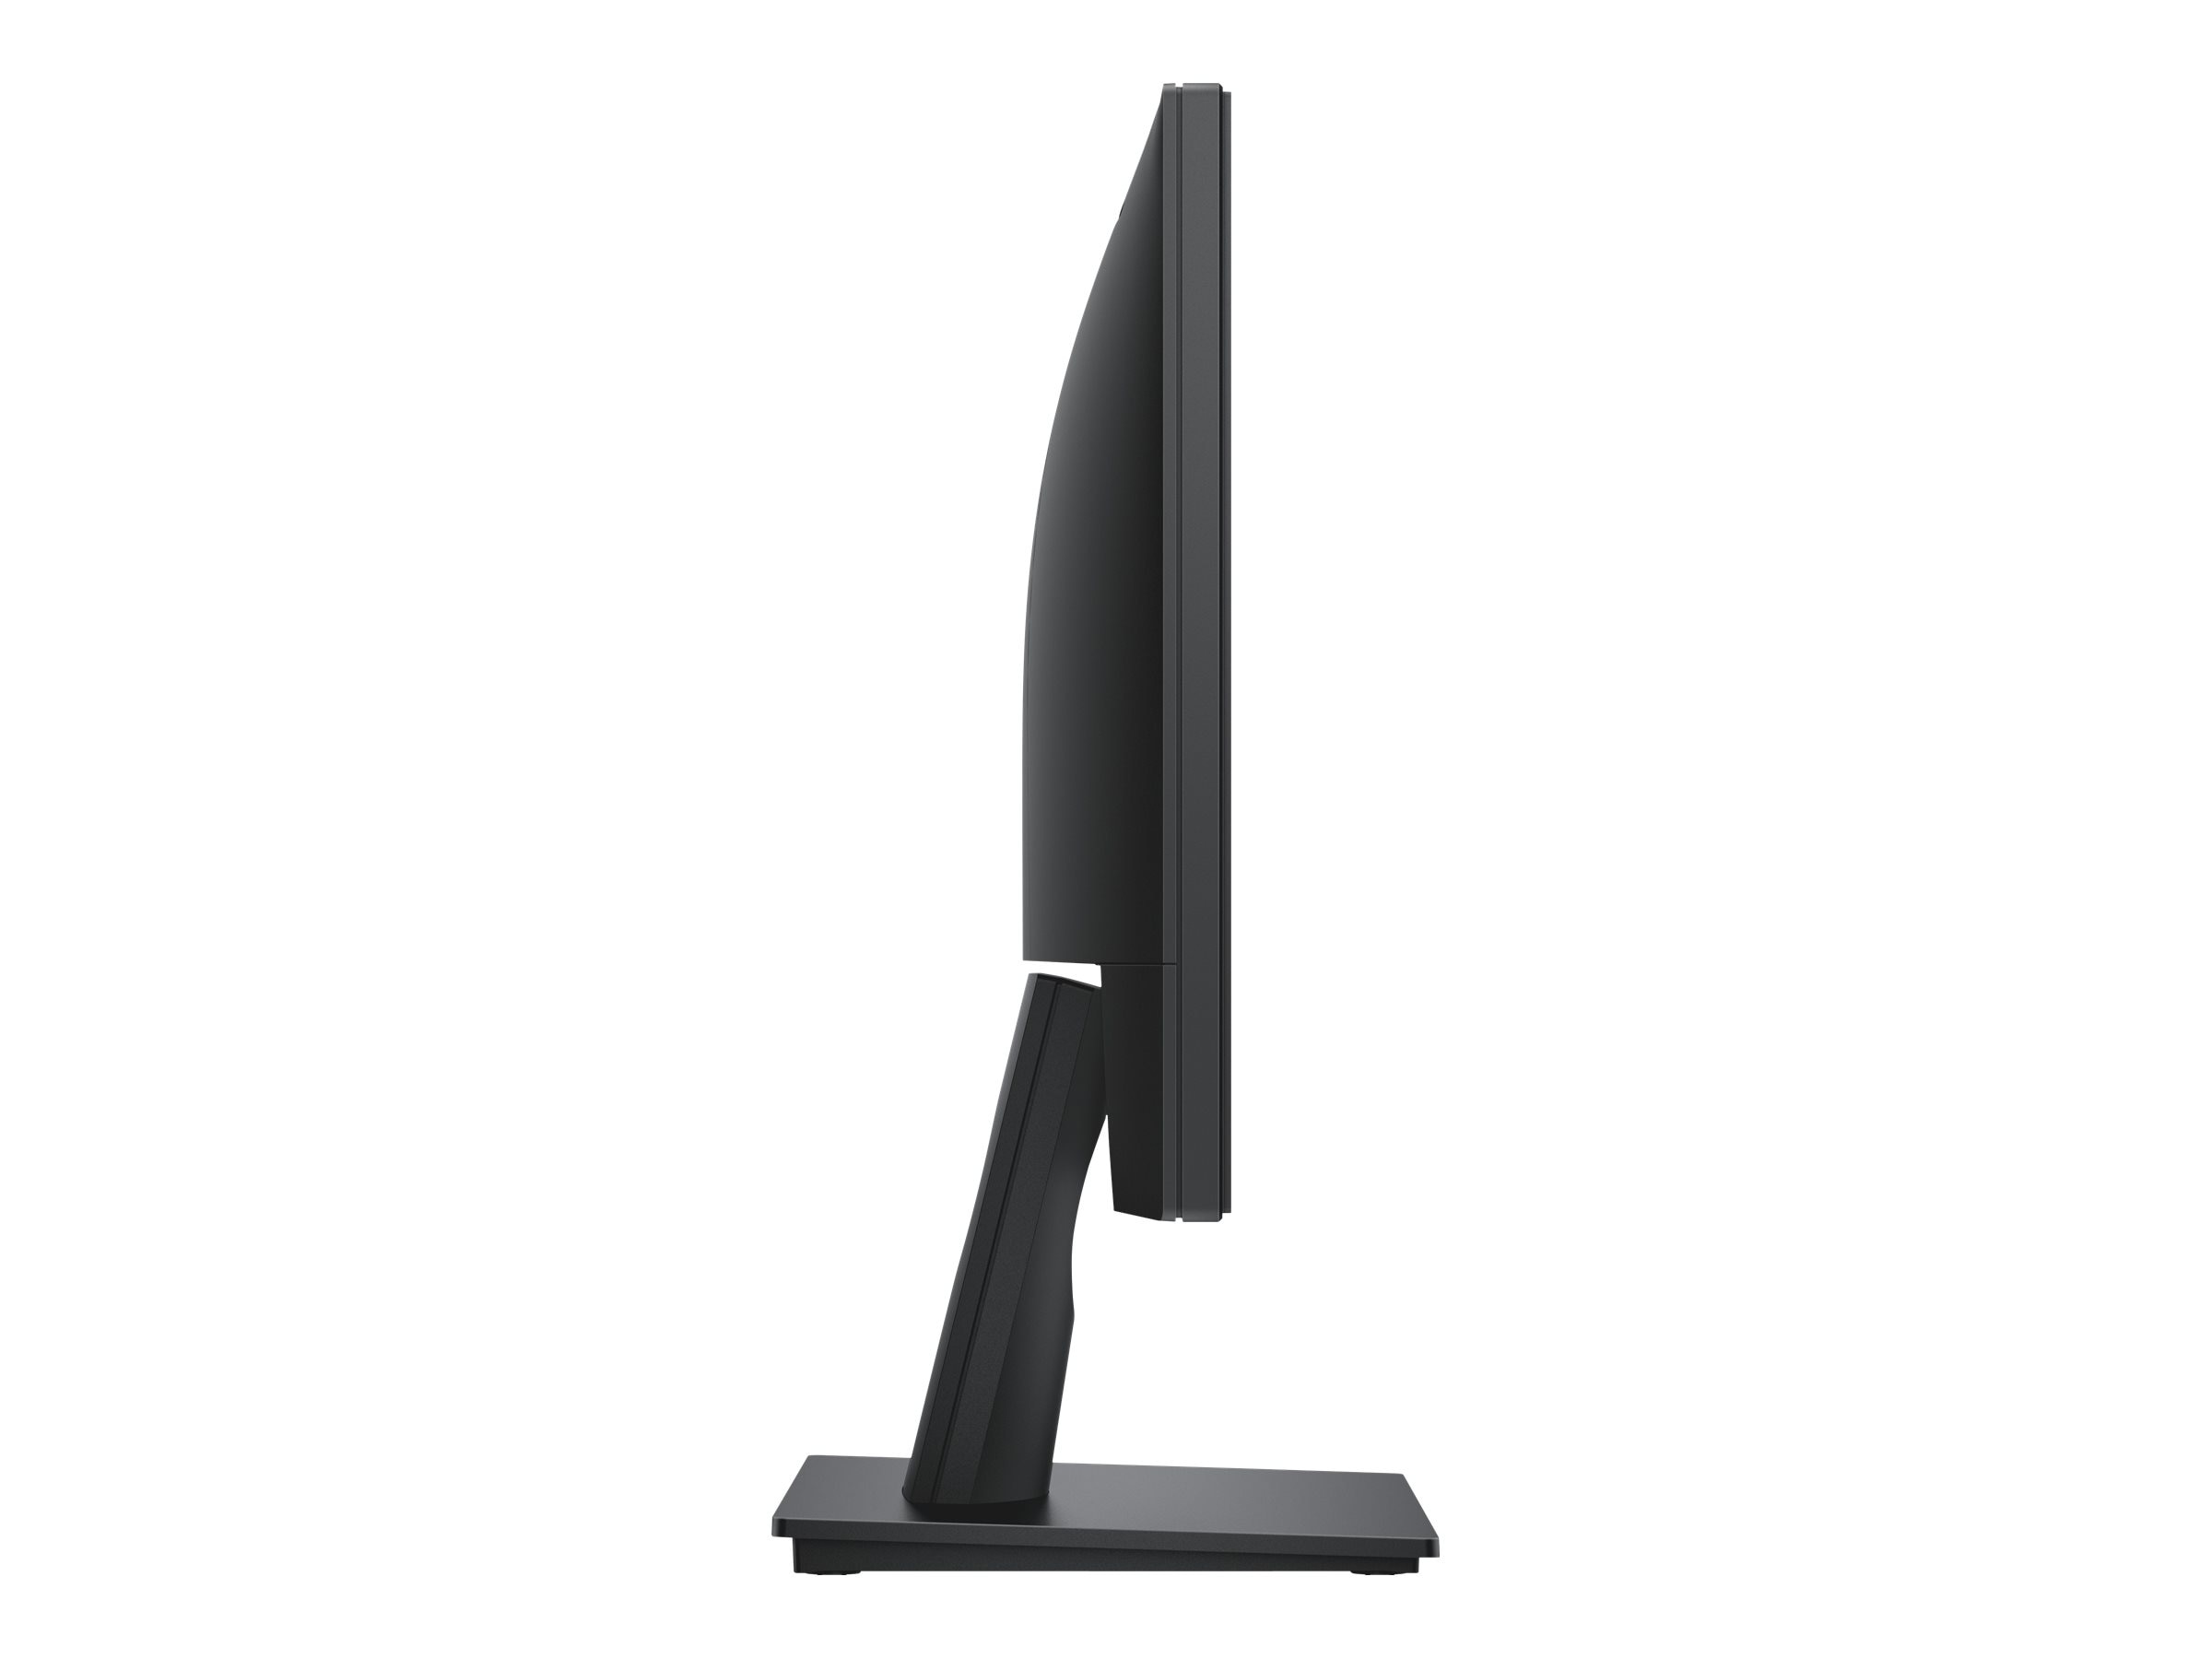 hemisphere hide overlook Buy Dell 18.5" E1916HV LED-LCD Monitor, Black at Connection Public Sector  Solutions